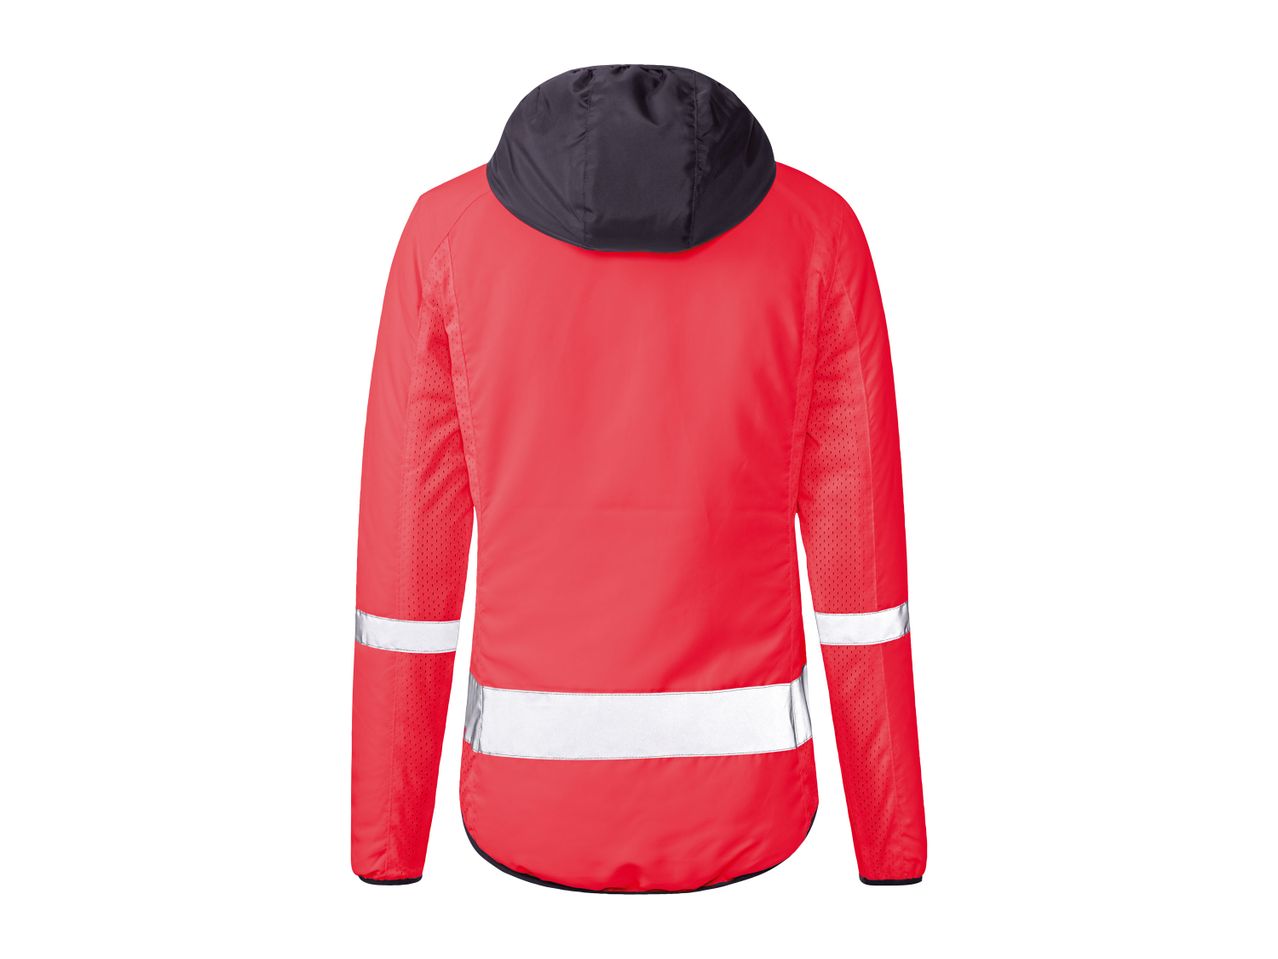 Go to full screen view: Crivit Ladies’ Reversible Cycling Jacket - Image 2